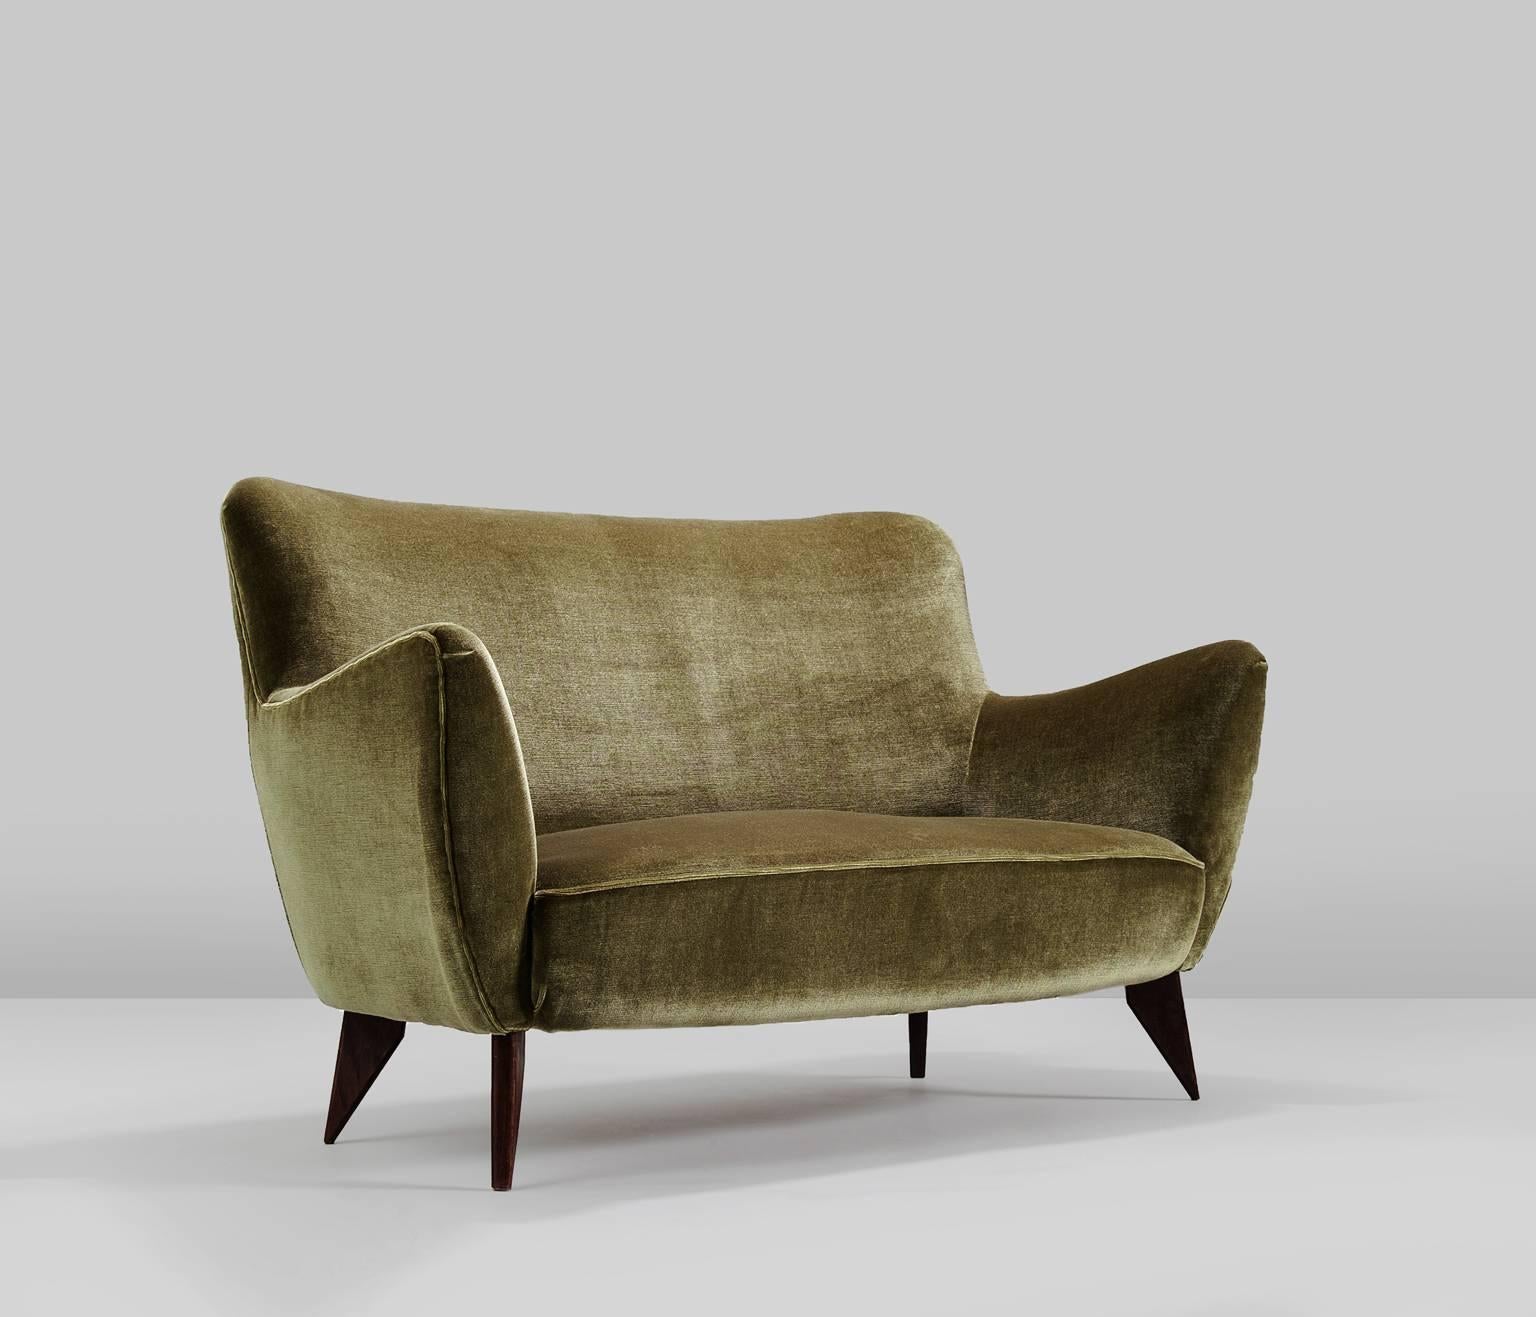 Sofa by Guglielmo Veronesi for I.S.A Bergamo, walnut, fabric, Italy, 1952.

This wingback sofa is an iconic example of Italian design from the fifties. Curveous, organic and sculptural, this two-seat sofa is anything but minimalistic. The small